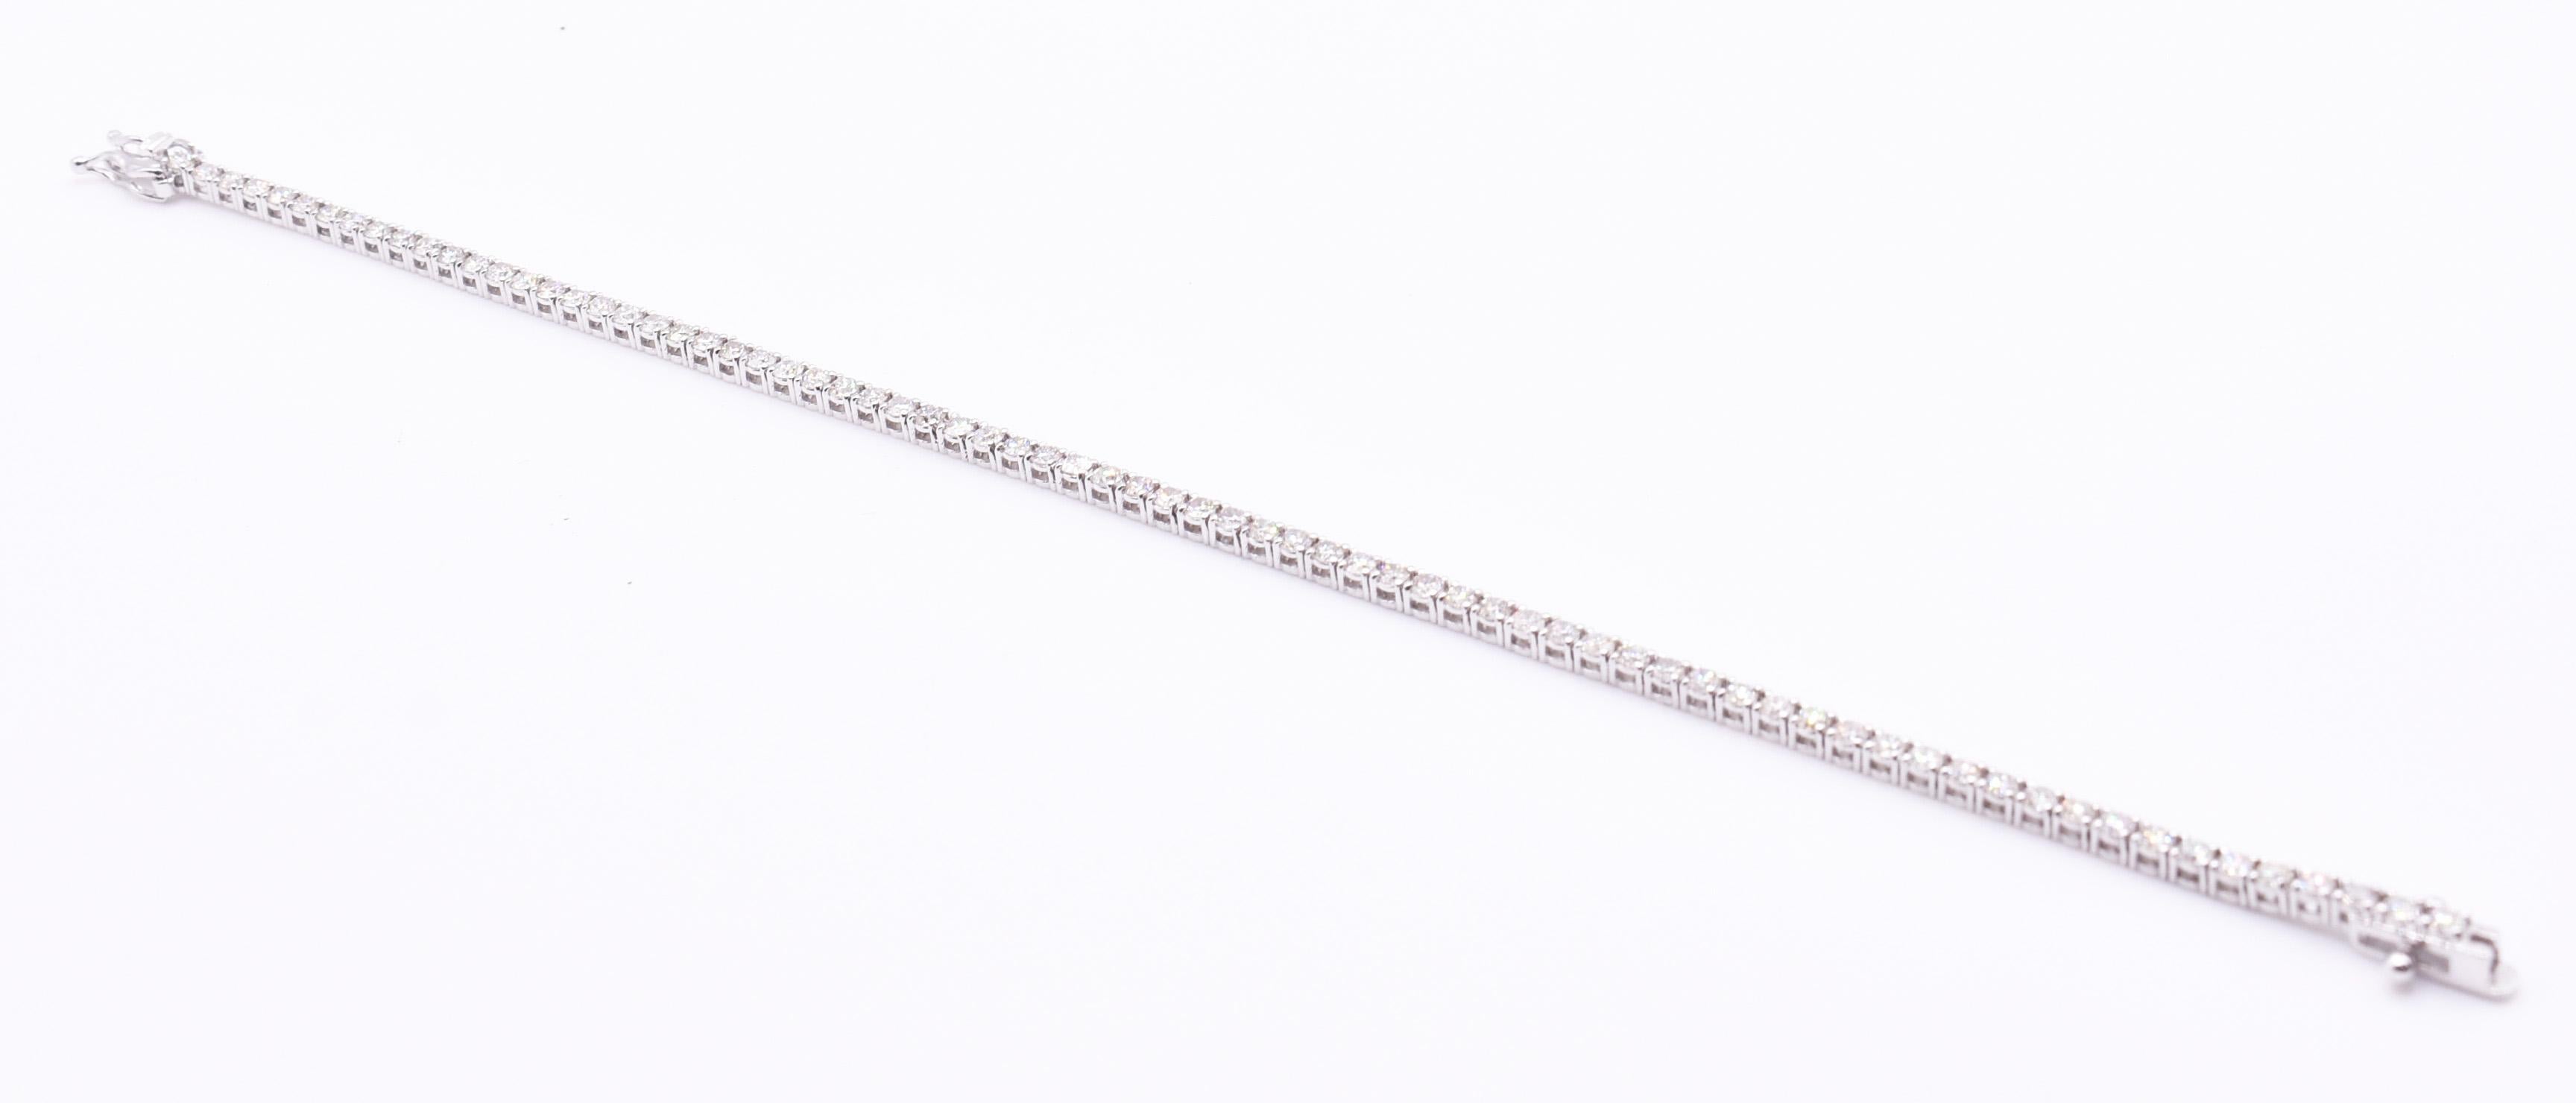 On offer for sale is a superb 18k white gold diamond tennis bracelet, having 72 round cut diamonds, with a total weight of 2.46ct.

Length: 7